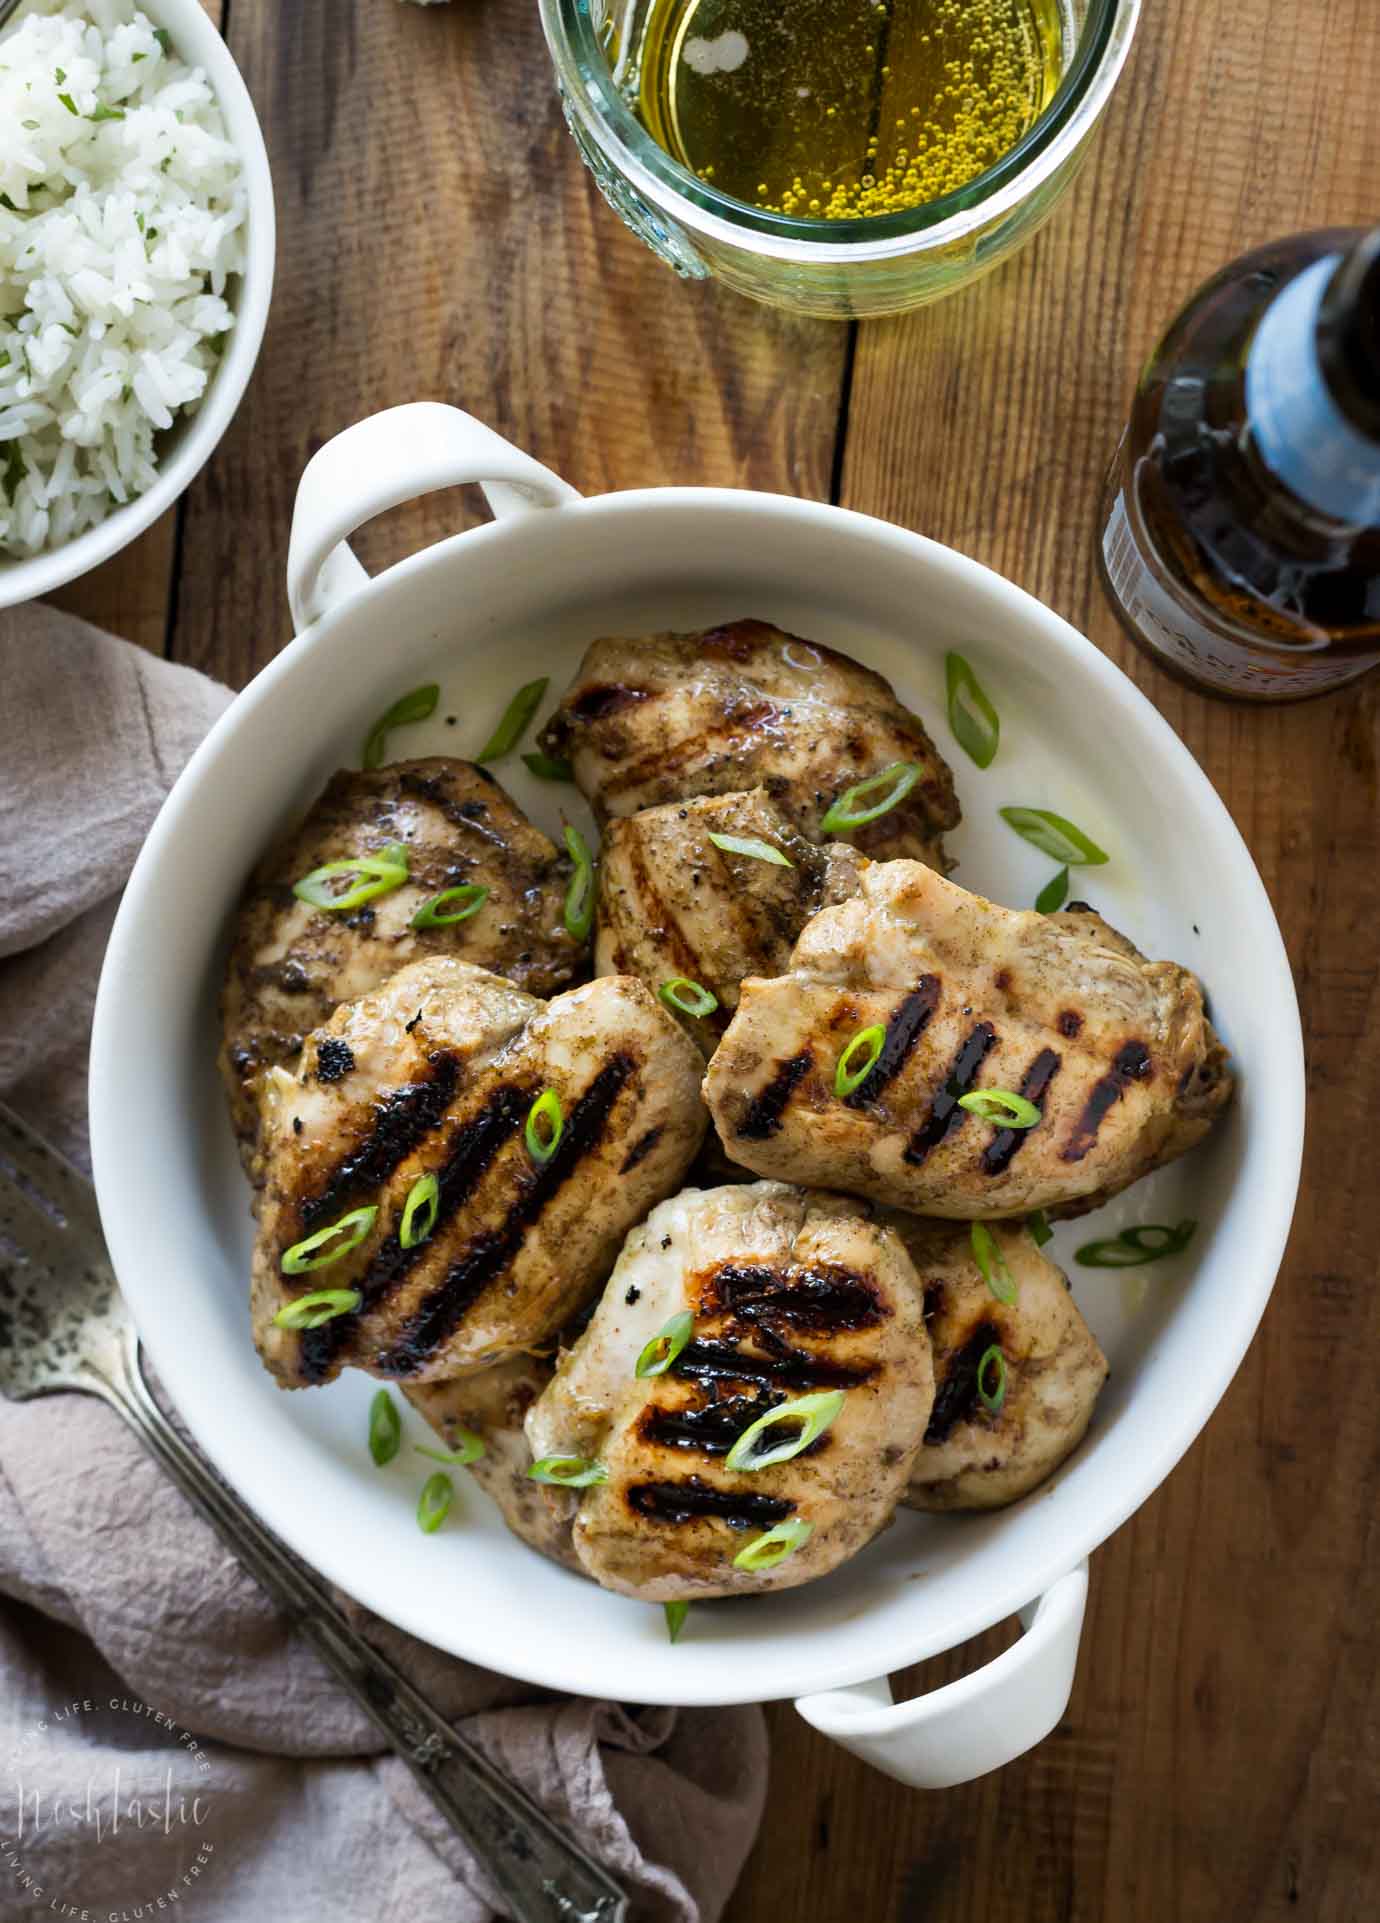 My authentic jerk chicken recipe is very simple to prepare and packs a fabulous flavor punch!! it's gluten free, paleo and whole30 too! Jerk chicken spice rub, jerk chicken marinade